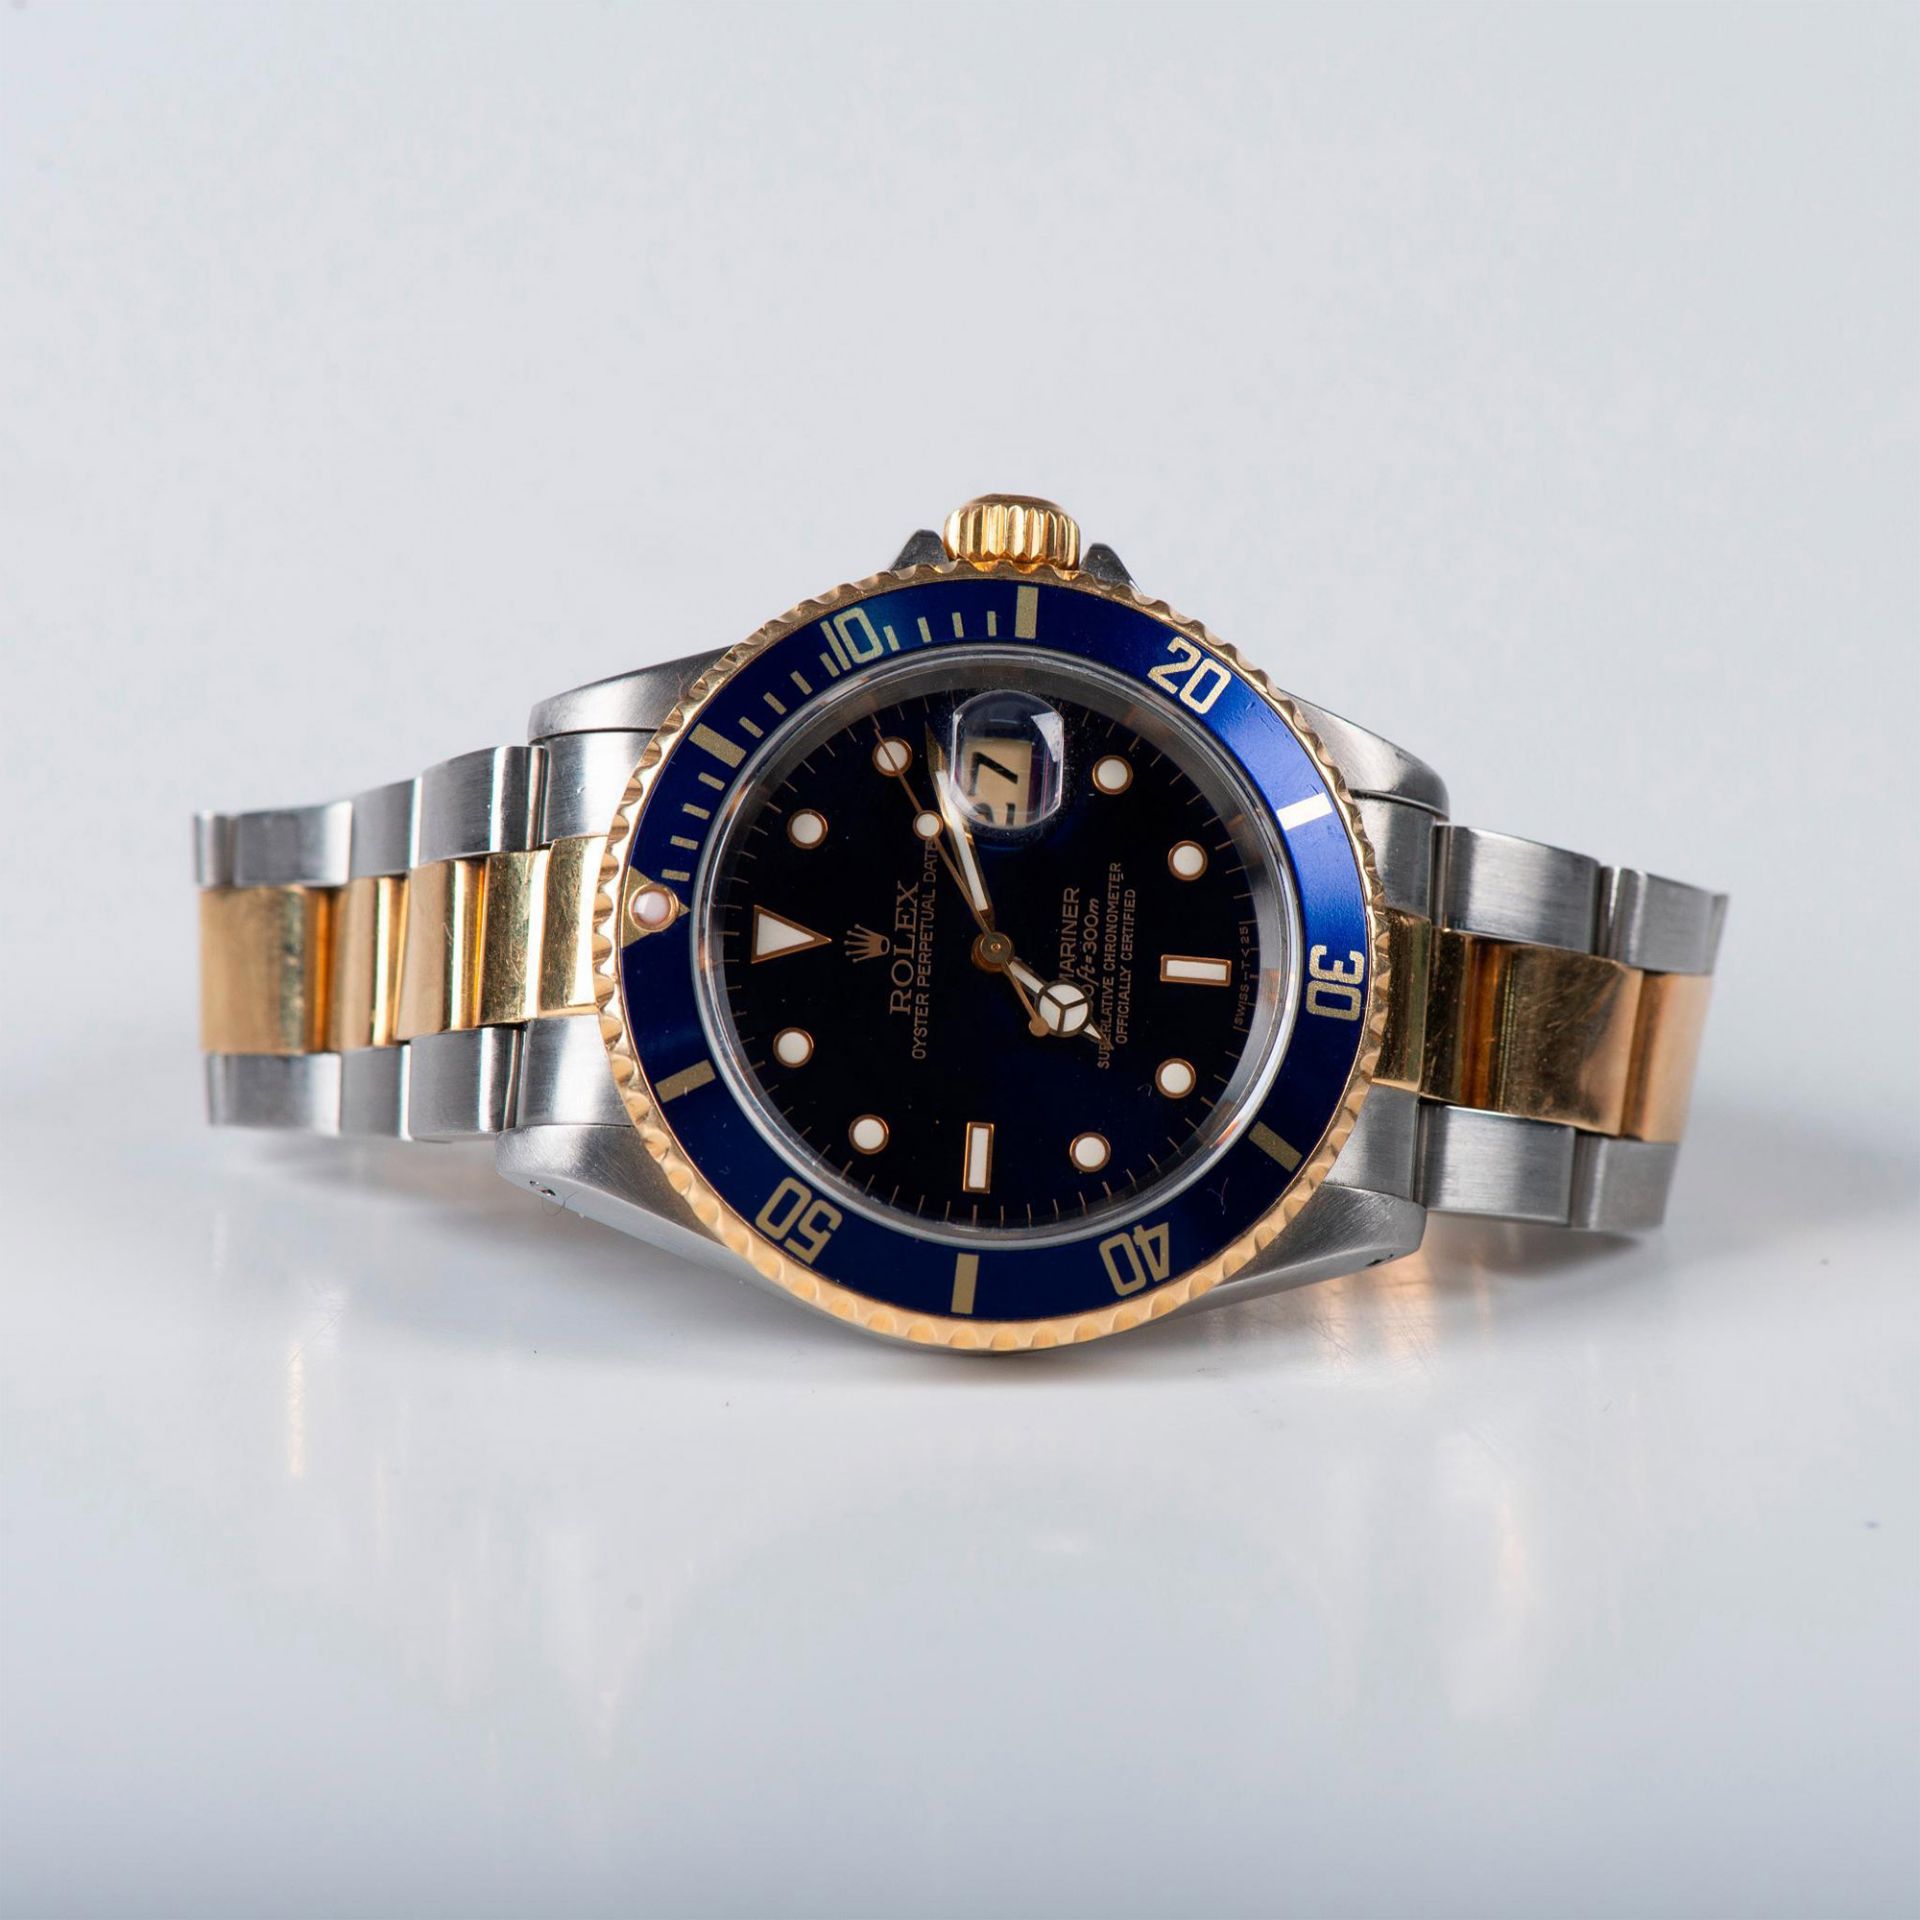 Rolex Submariner Oyster Perpetual Date Watch - Image 6 of 18